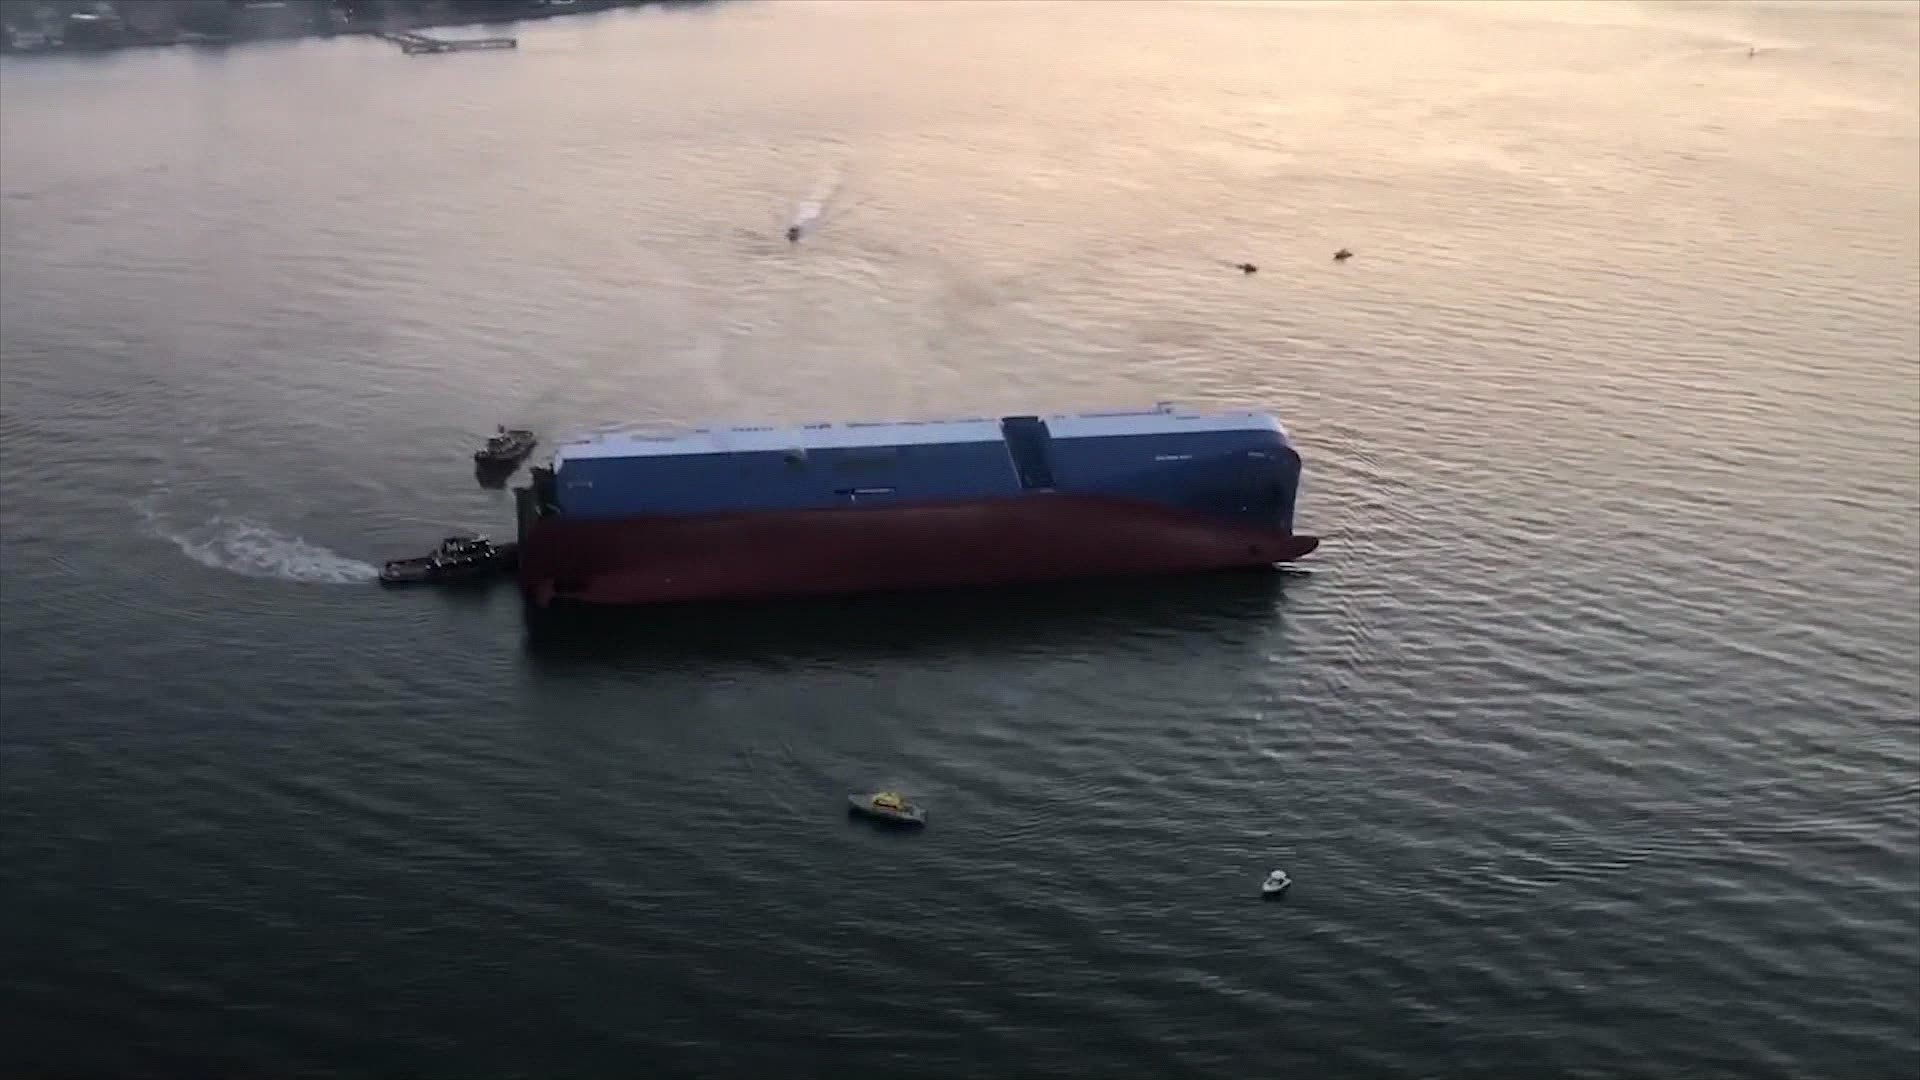 The cargo vessel, Golden Ray (656 feet long and 106 feet wide),  flipped on its side off St. Simons Island, Ga. at approximately 2 a.m. Sunday, according to the Georgia Ports Authority. The call initially came in as a ship that had capsize. 20 people have been safely removed. The vessel is listing heavily in the St. Simons Sound.